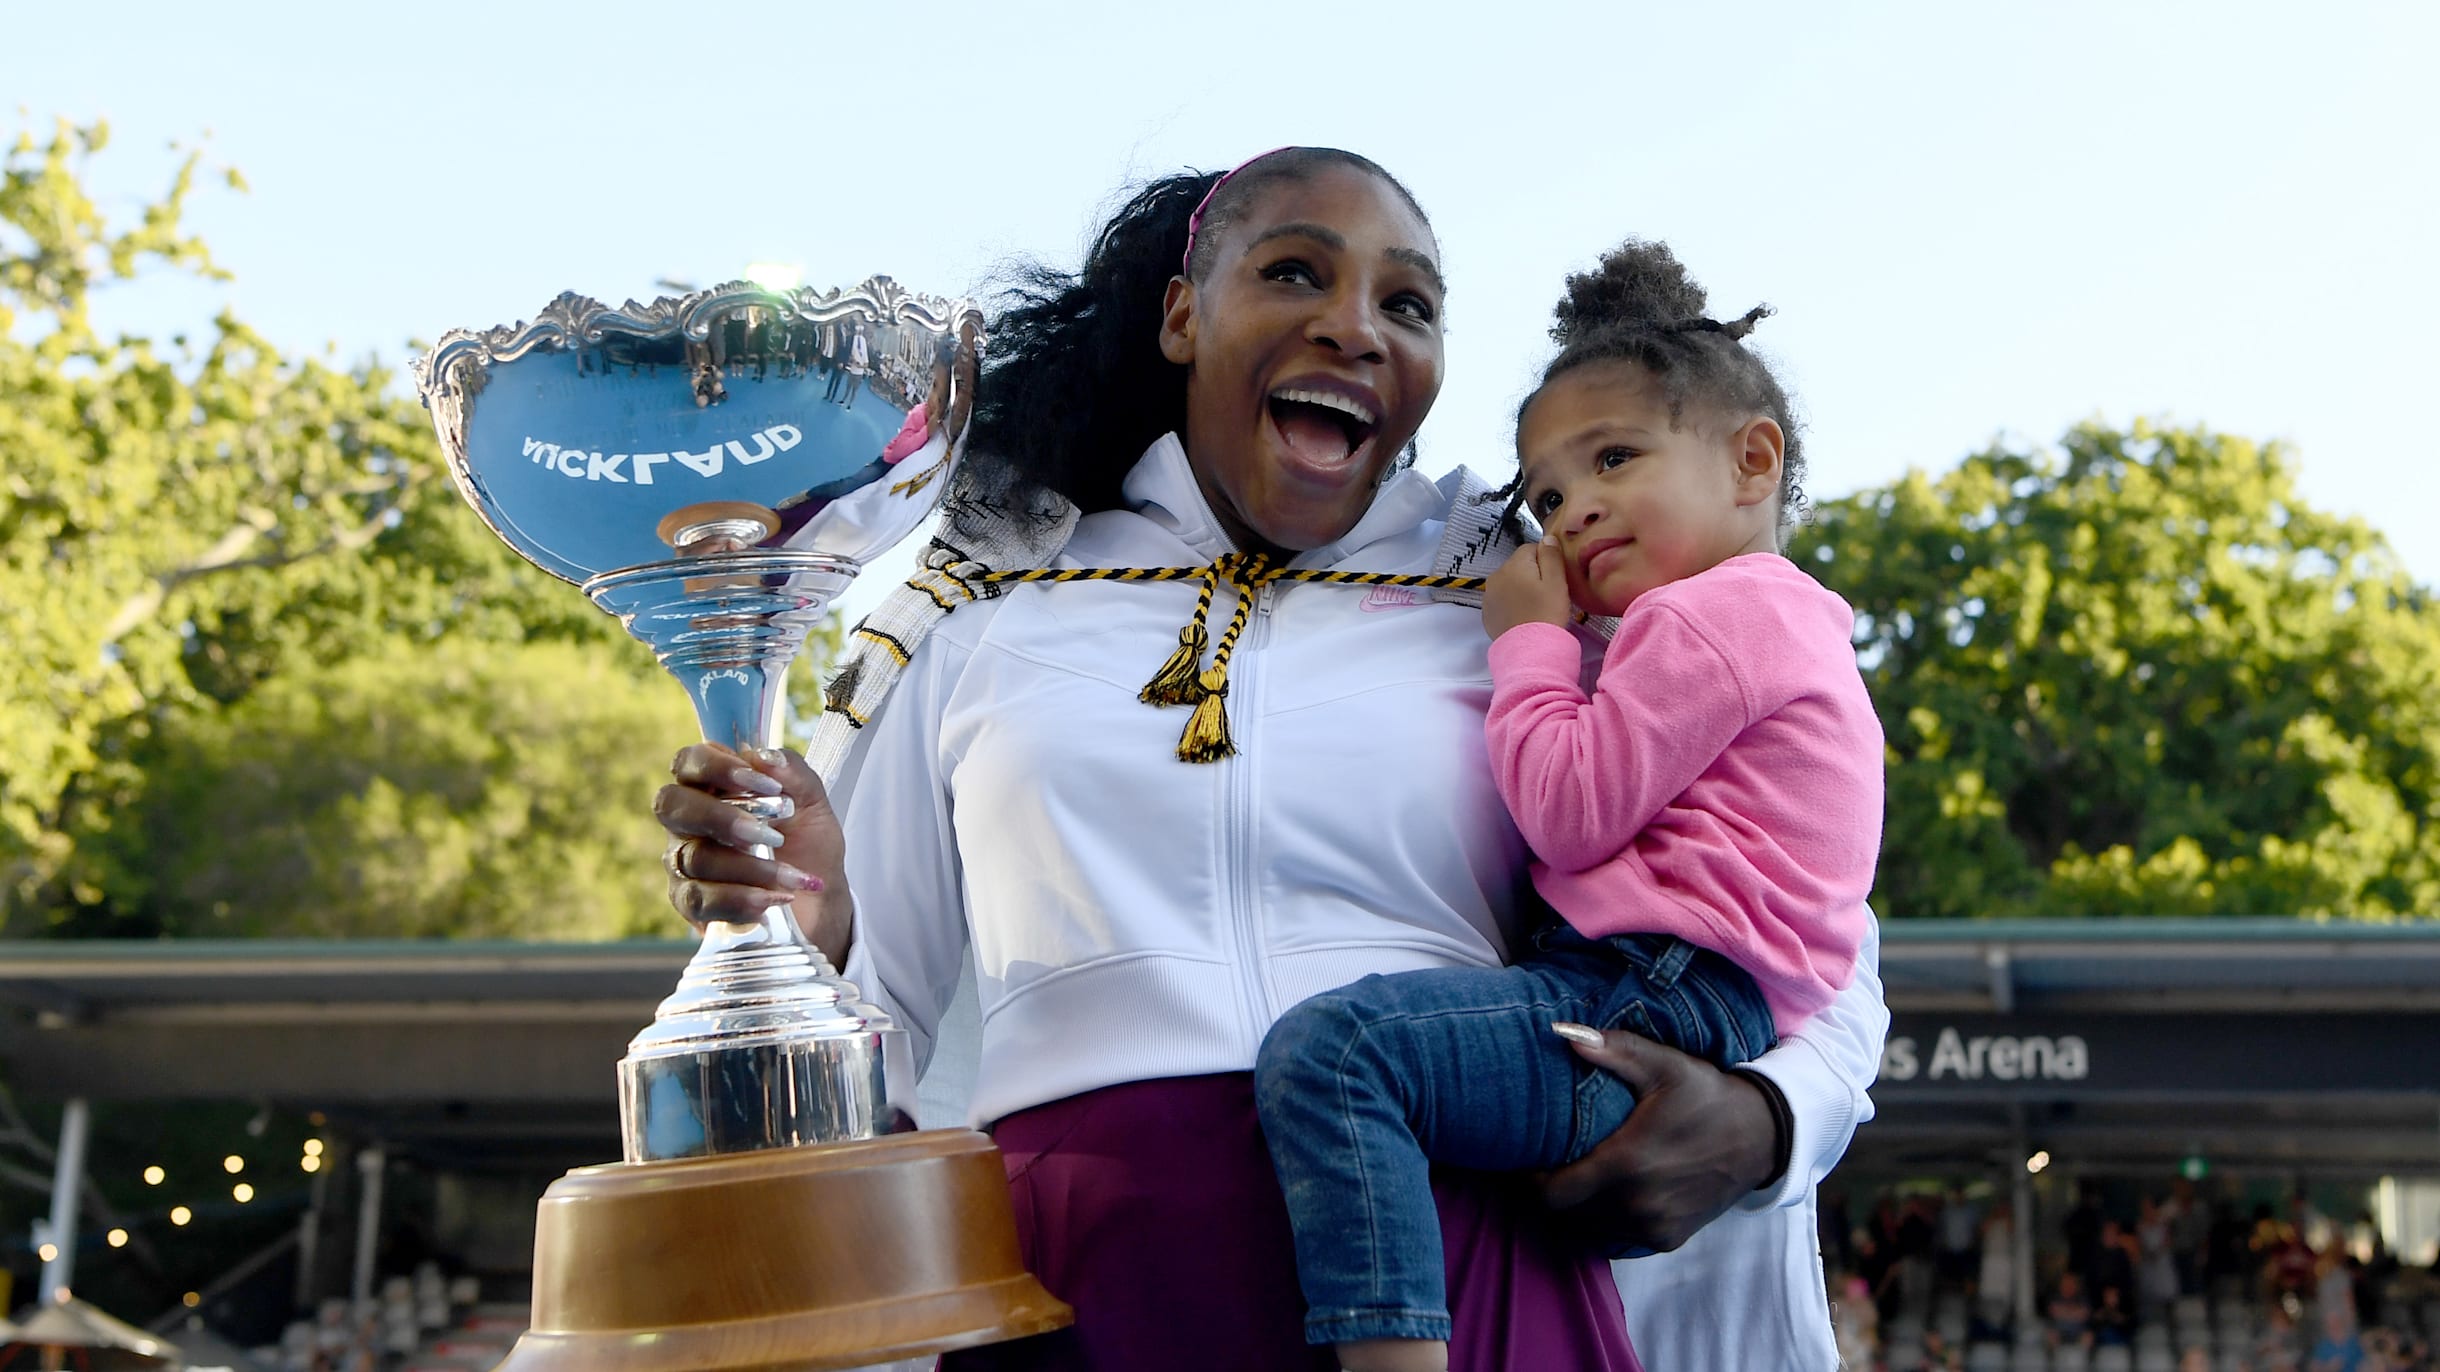 Serena Williams' Daughter Olympia - All You Need To Know About